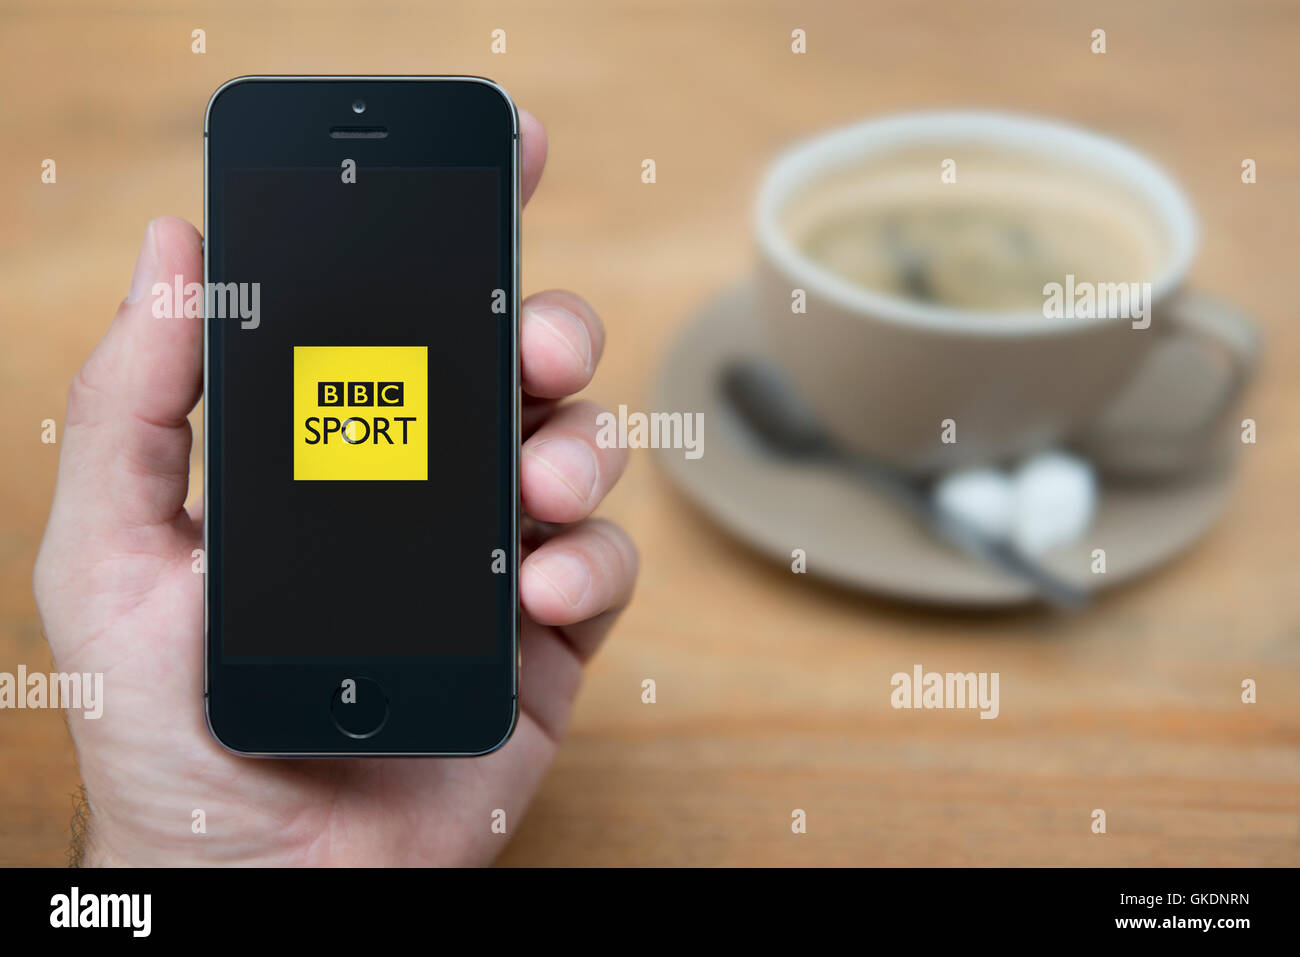 A man looks at his iPhone which displays the BBC Sport logo, while sat with a cup of coffee (Editorial use only). Stock Photo